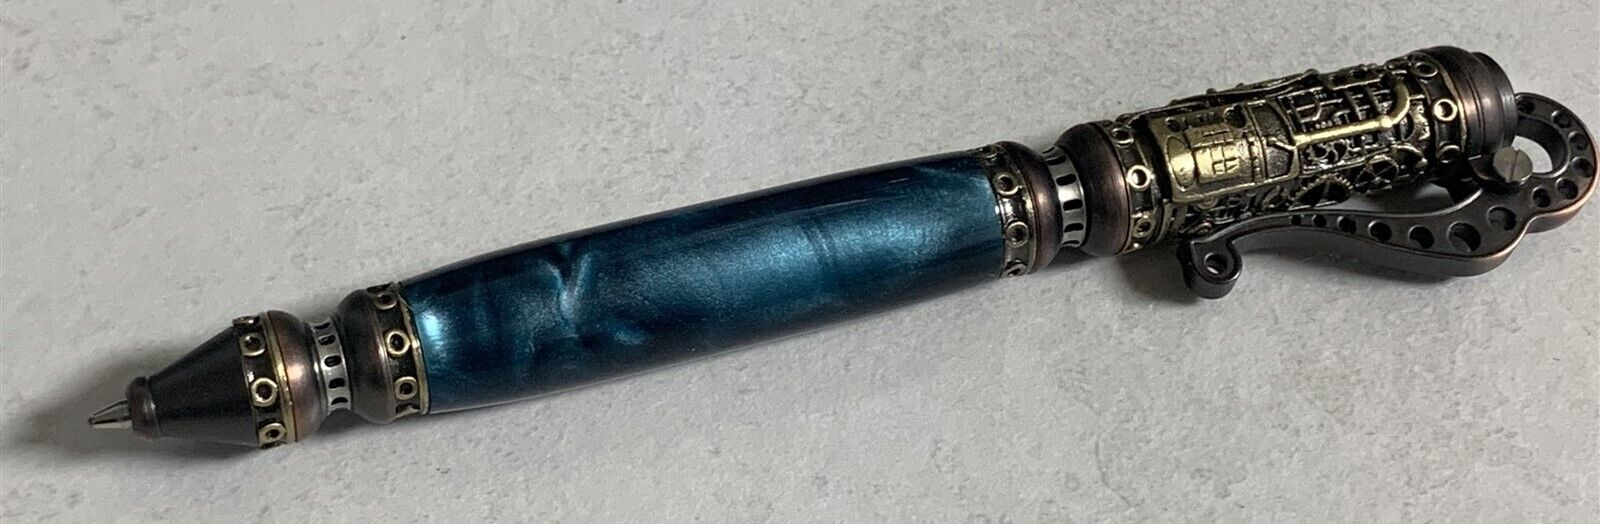 HIGH QUALITY LEVER ACTION STEAMPUNK DARK TEAL PEARL ACRYLIC BALL POINT PEN